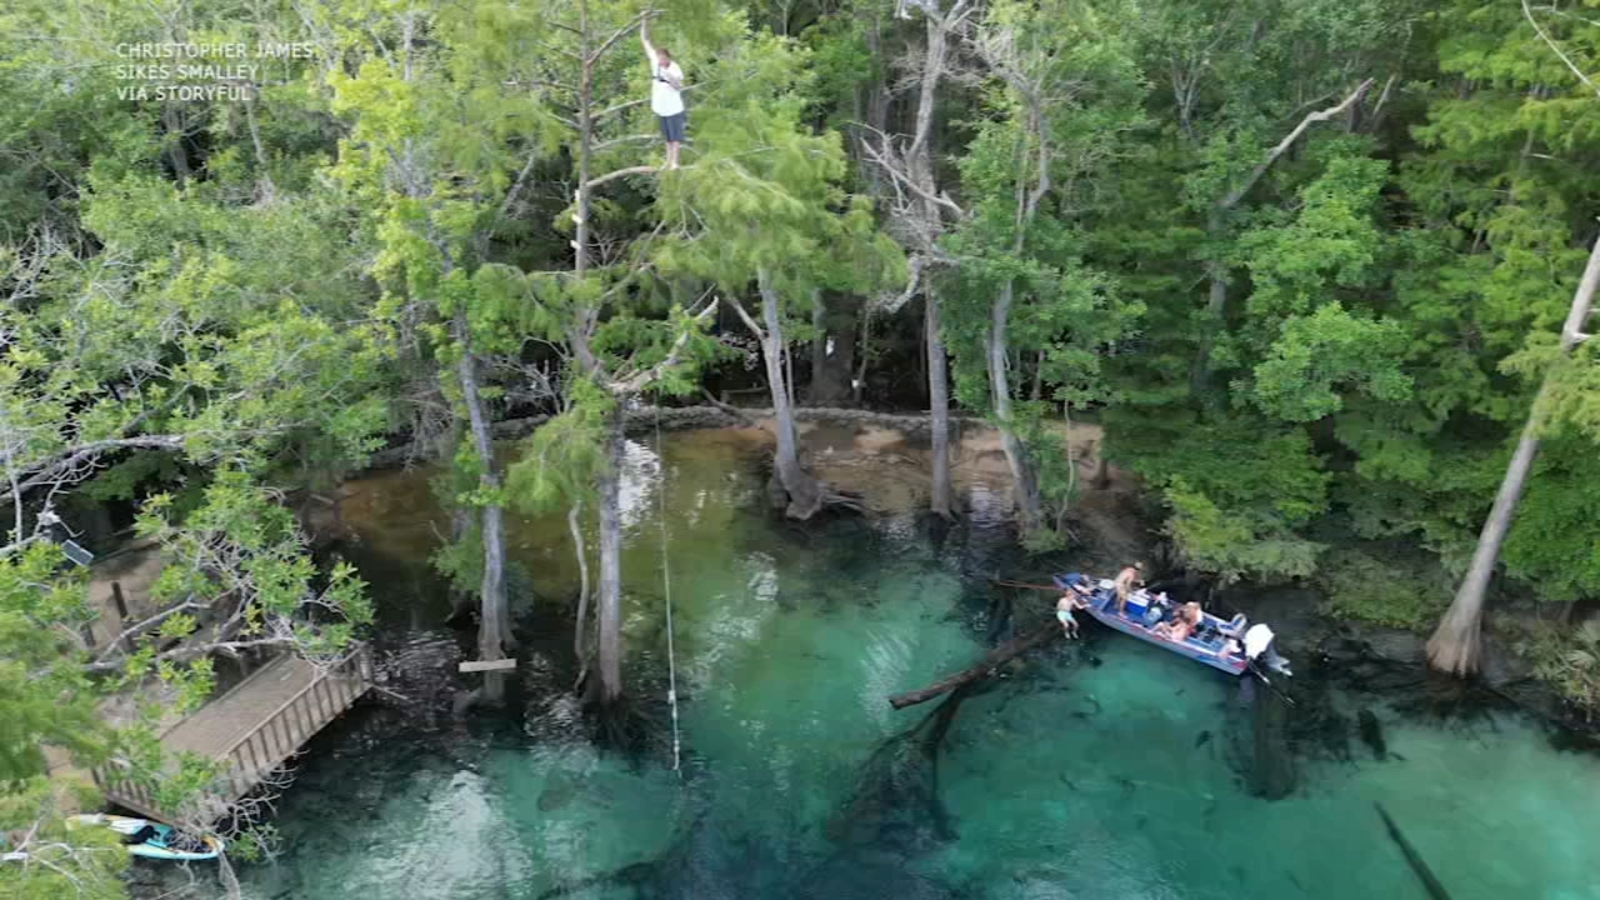 Christopher James Sikes Smalley ‘falls 60 feet’ into water at Crystal Springs Vernon, Florida after branch breaks: VIDEO